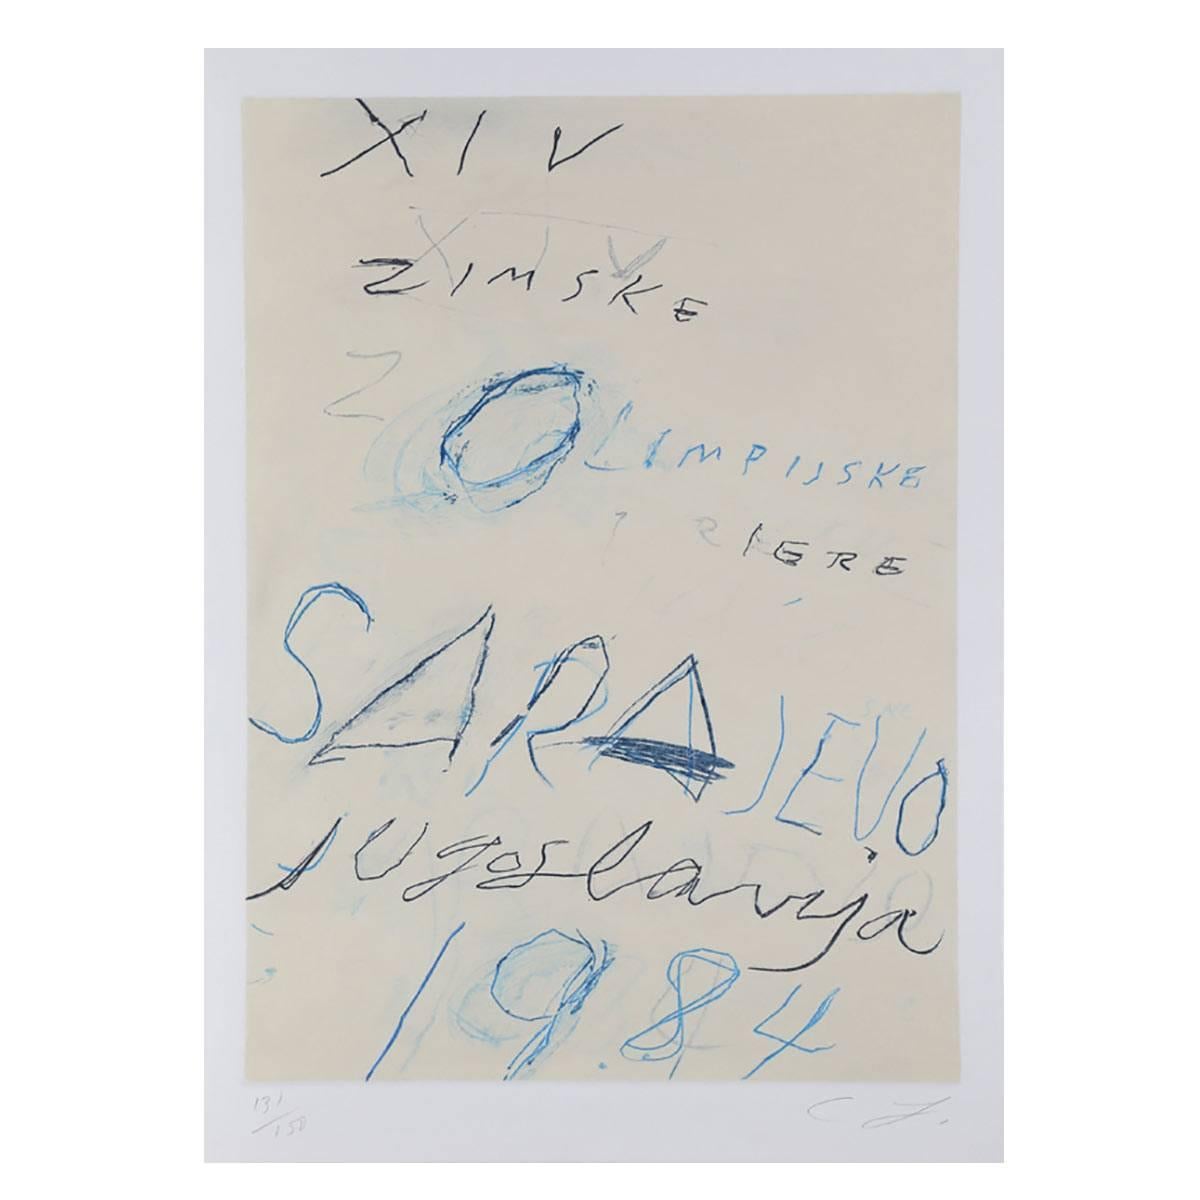 Untitled, from "Art & Sports", lithograph by Cy Twombly